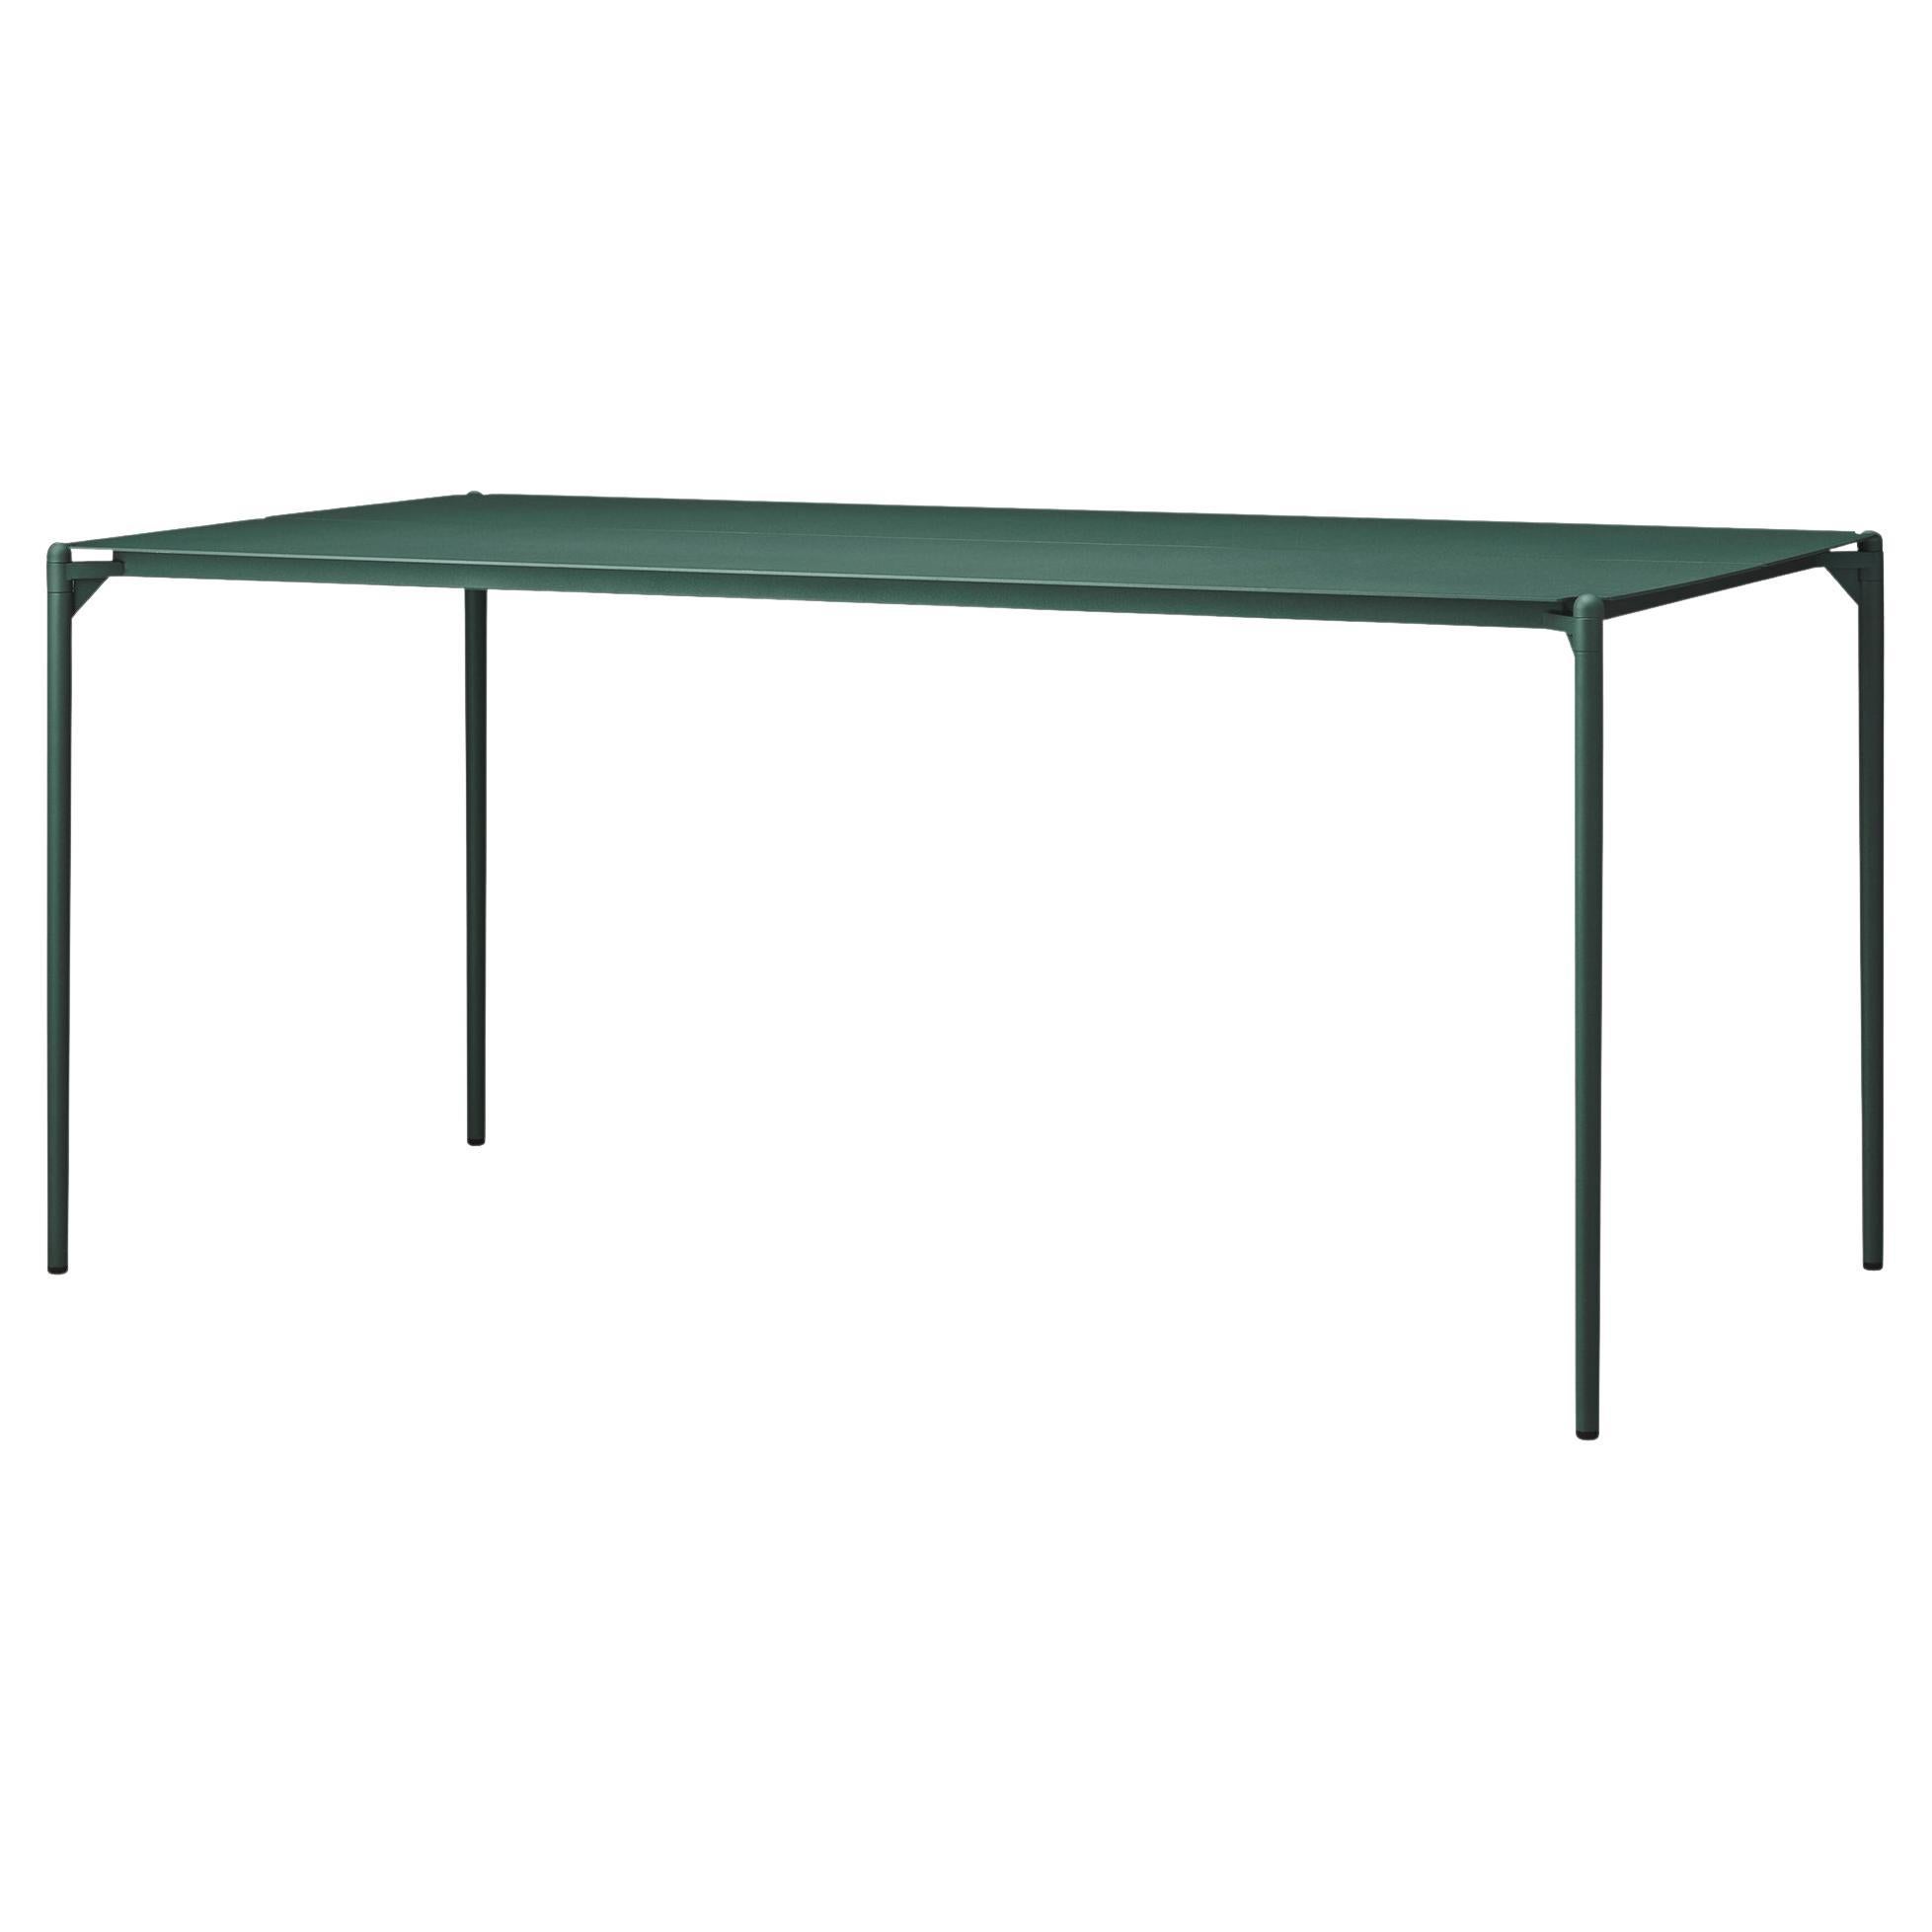 Table Forest Minimalist de taille moyenne